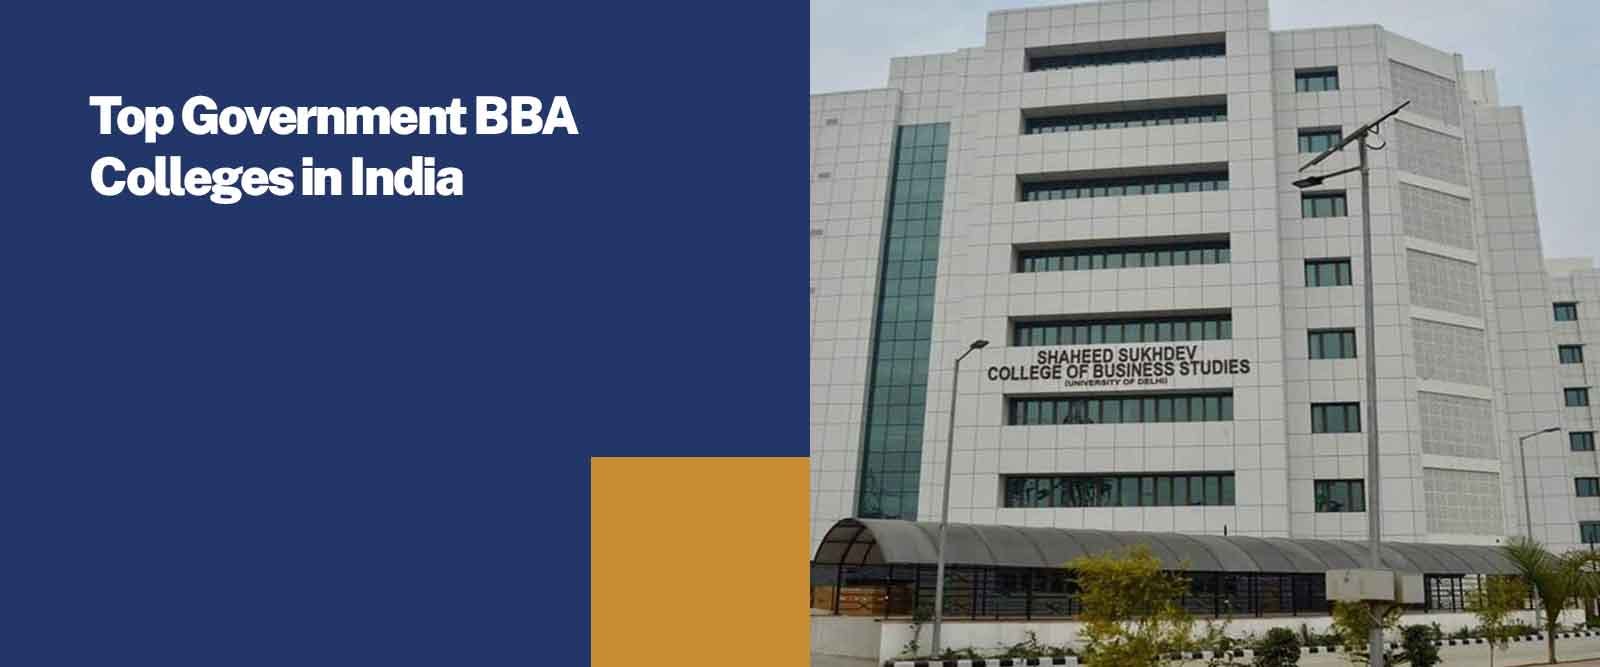 Top Government BBA Colleges in India